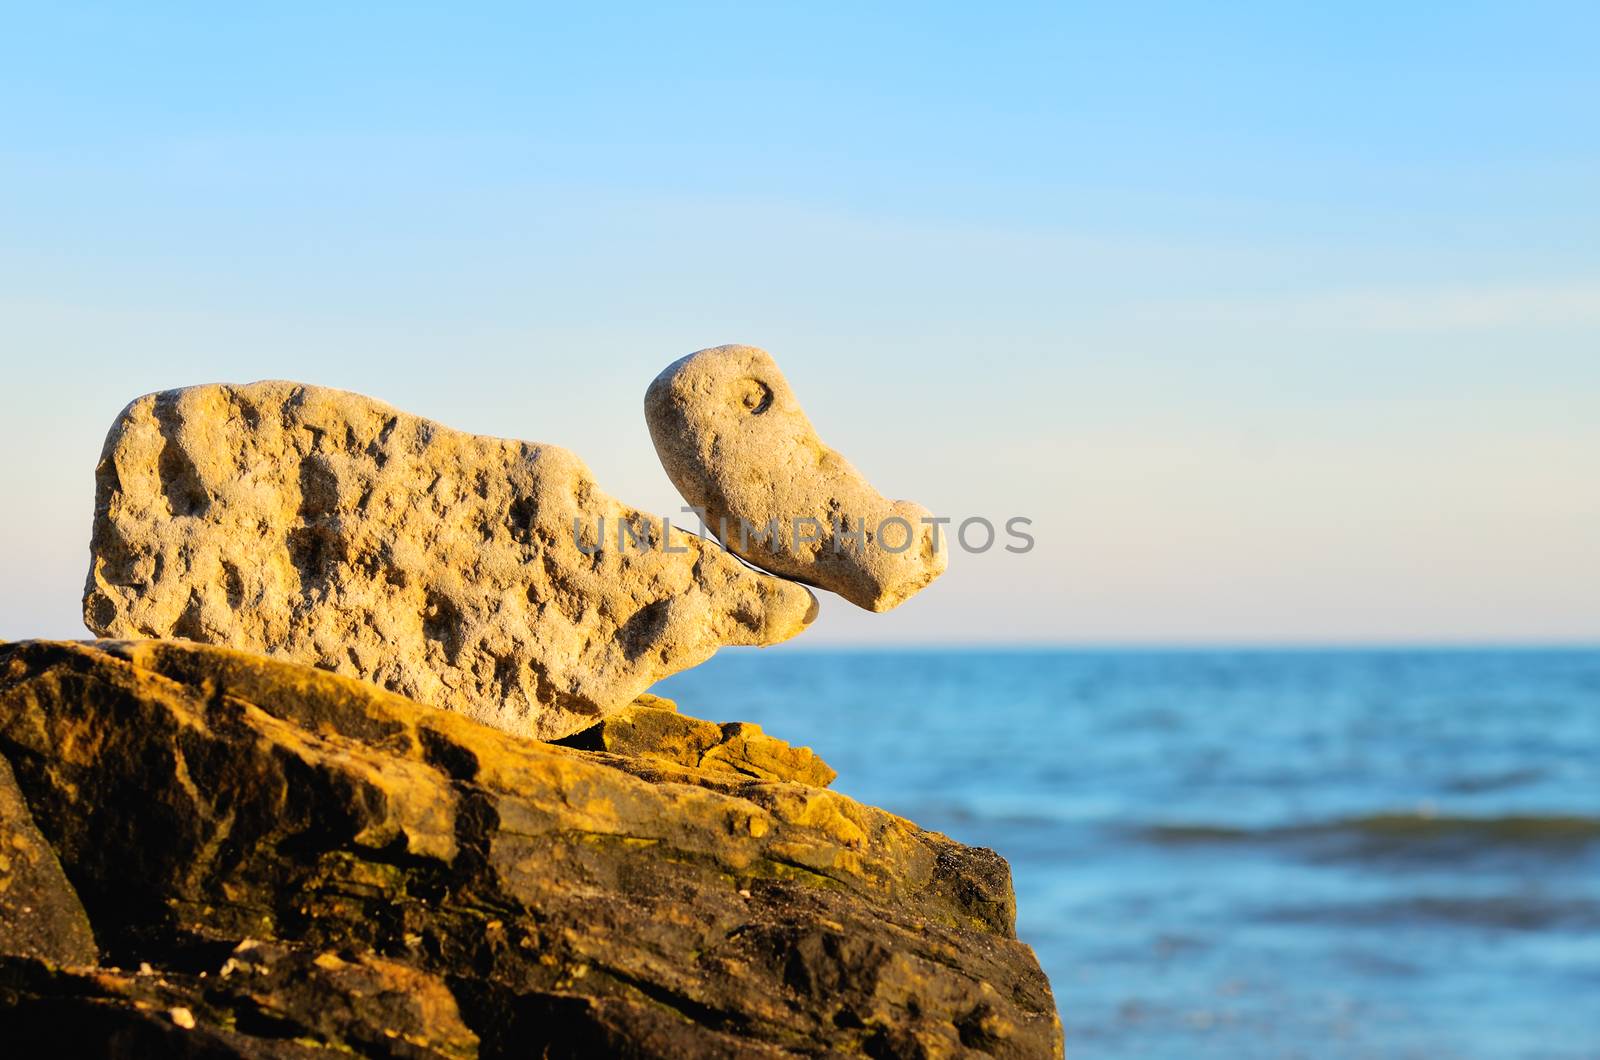 Image of bird, made of pebbles